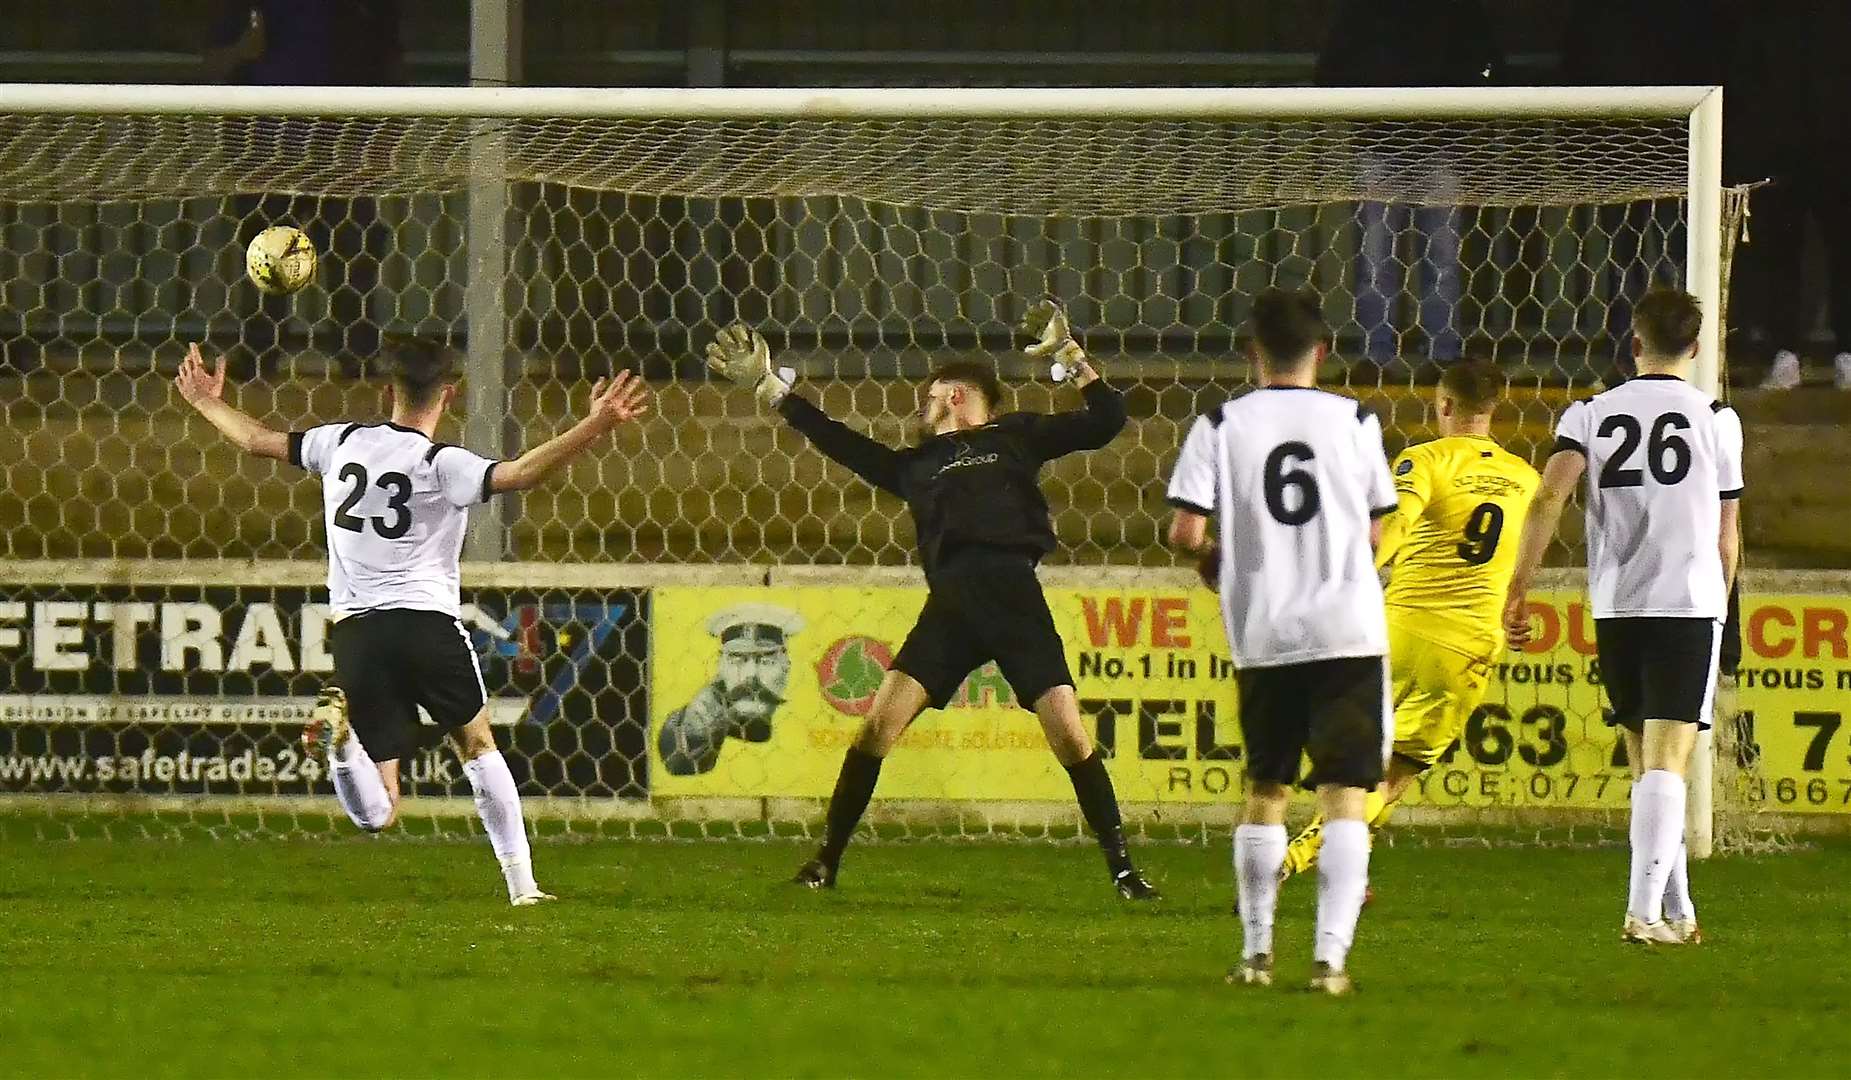 Steven Anderson latches onto a through ball and fires it past Clach keeper Daniel Rae for the winning goal. Picture: Mel Roger